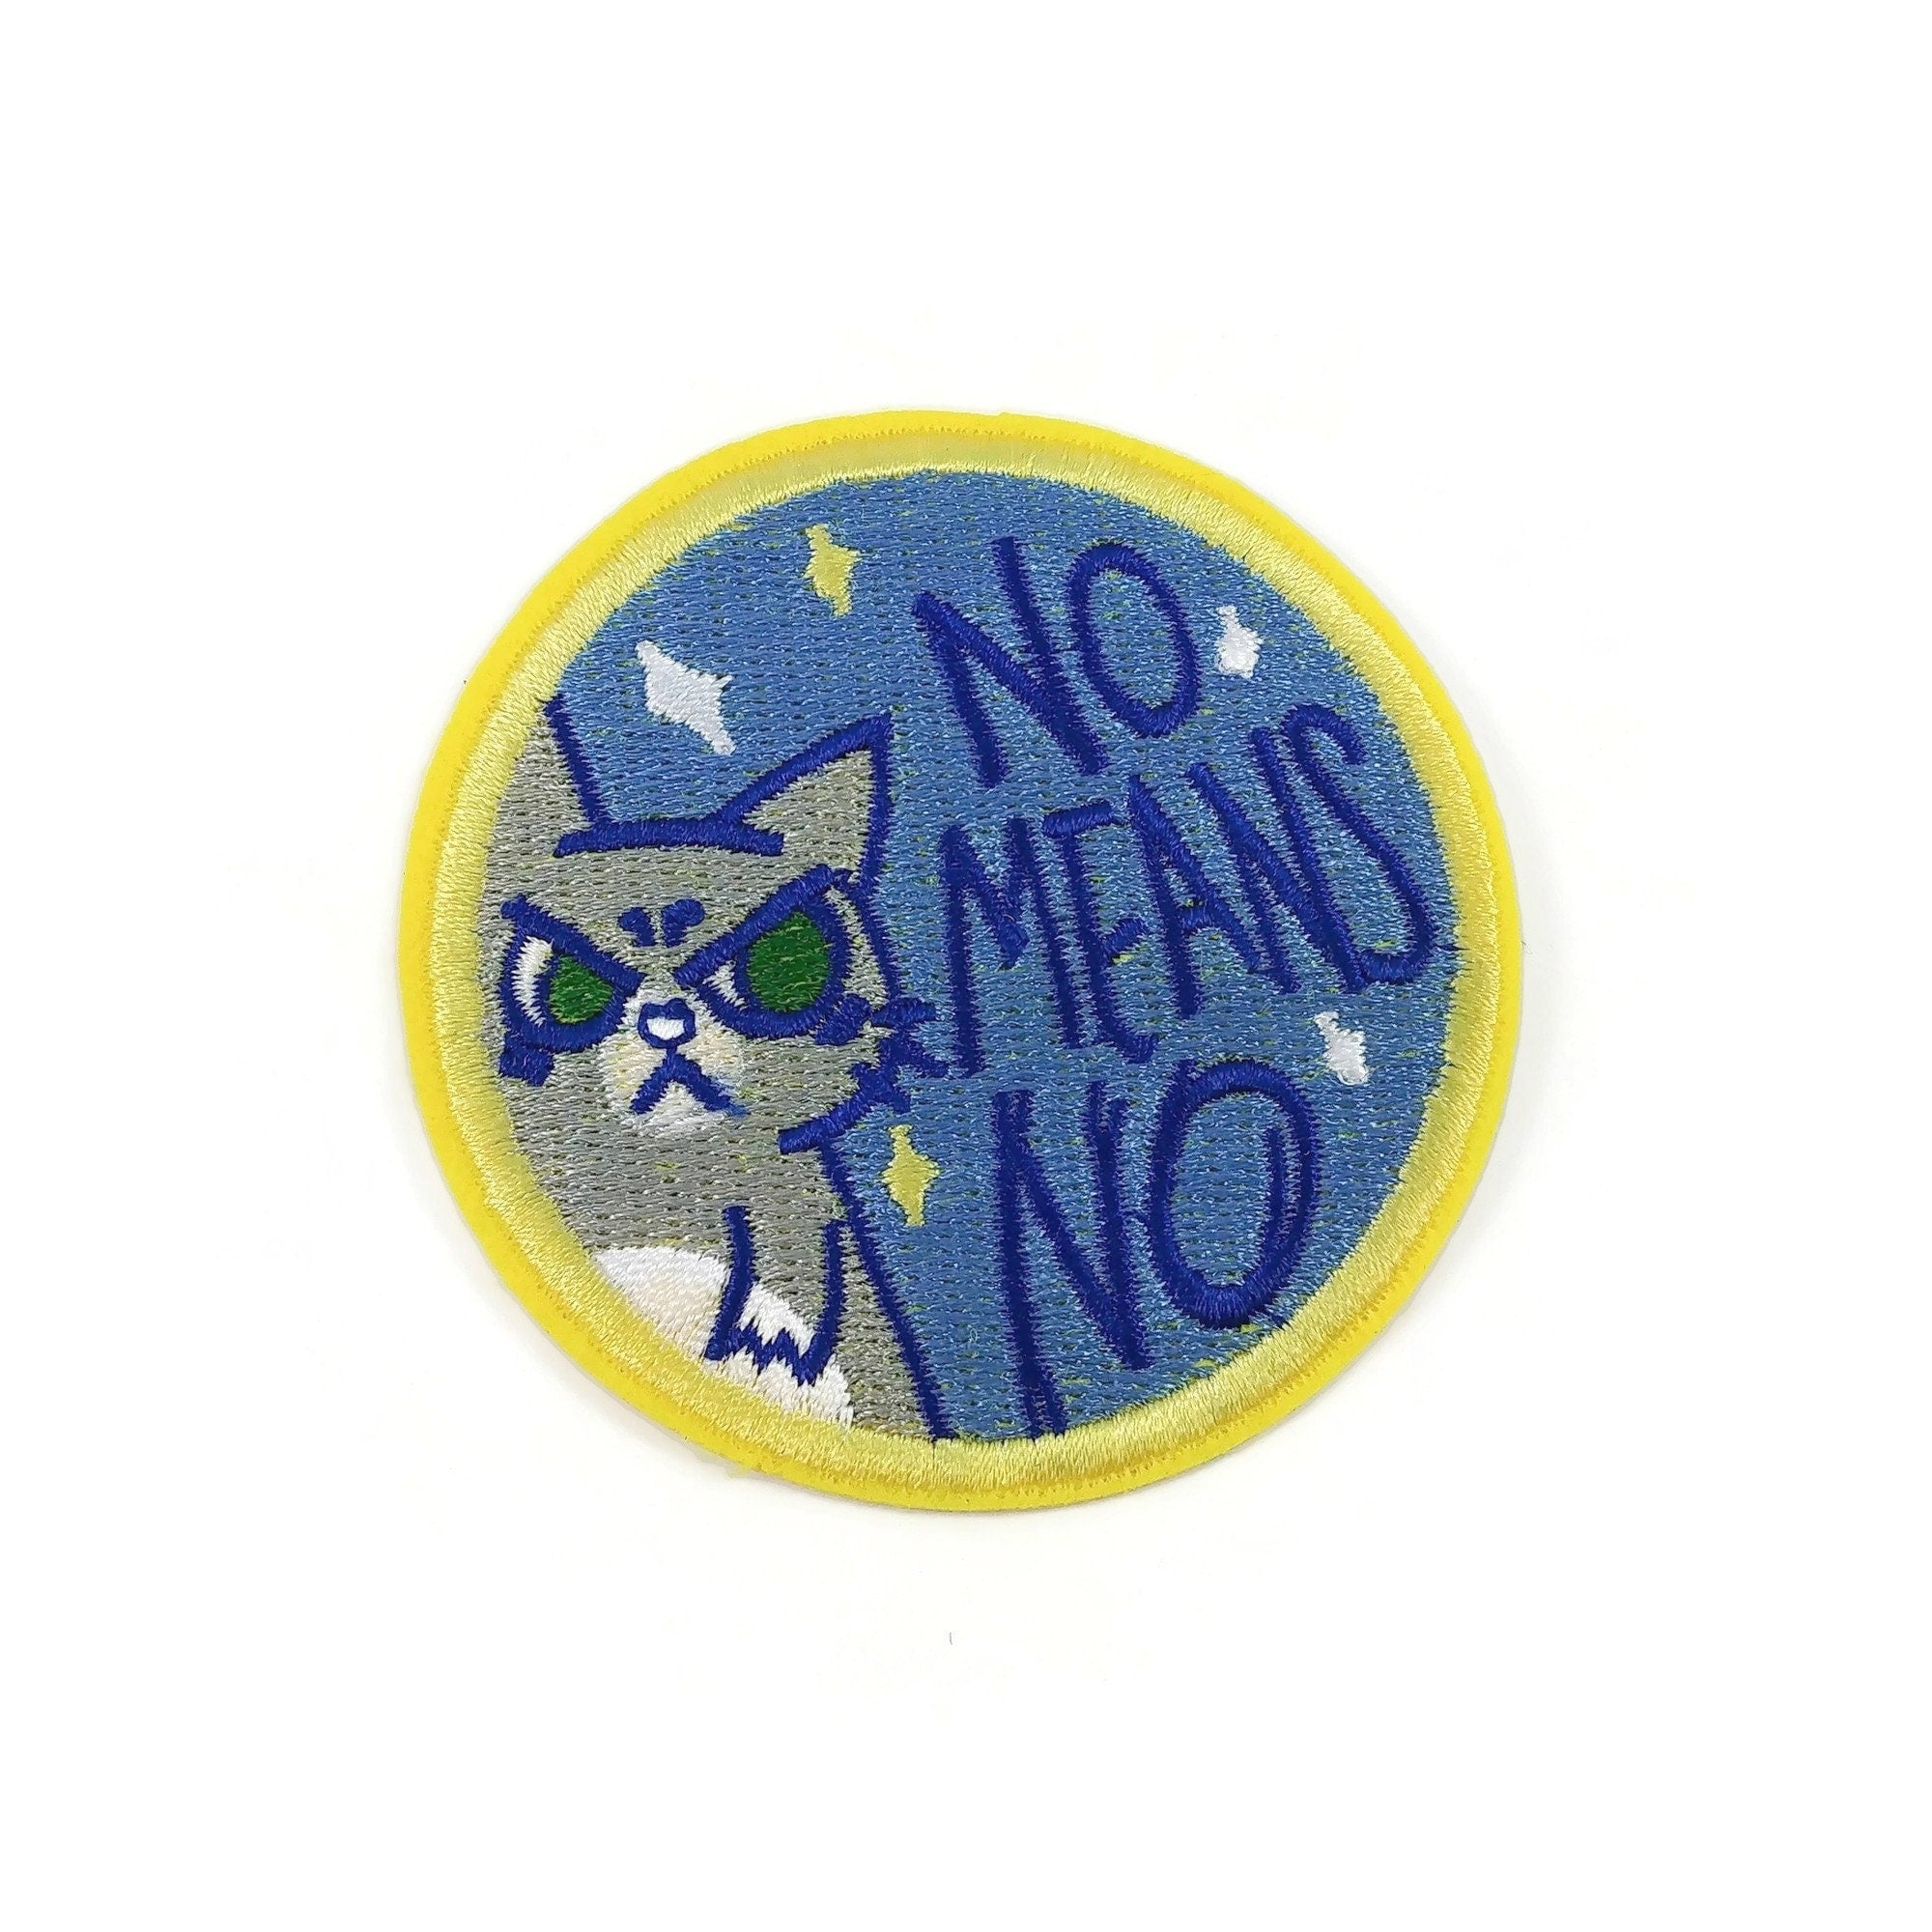 NO MEANS NO iron on patch, Cat embroidered sew on patch, Funny badge appliques